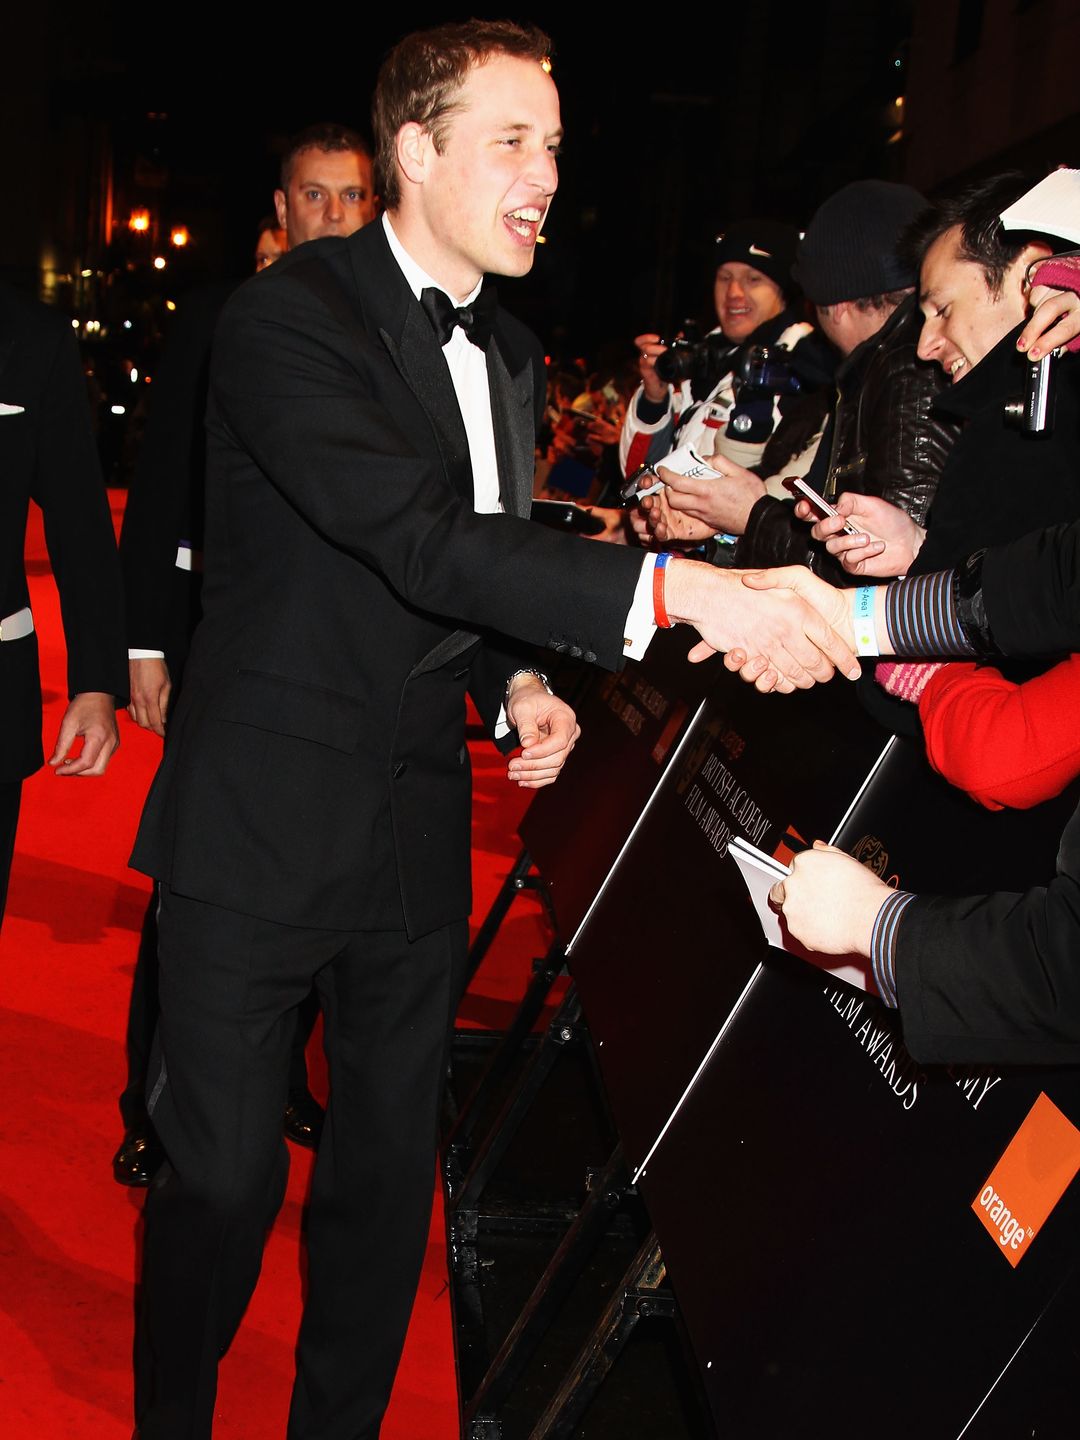 Prince William attends the British Academy Film Awards 2010 